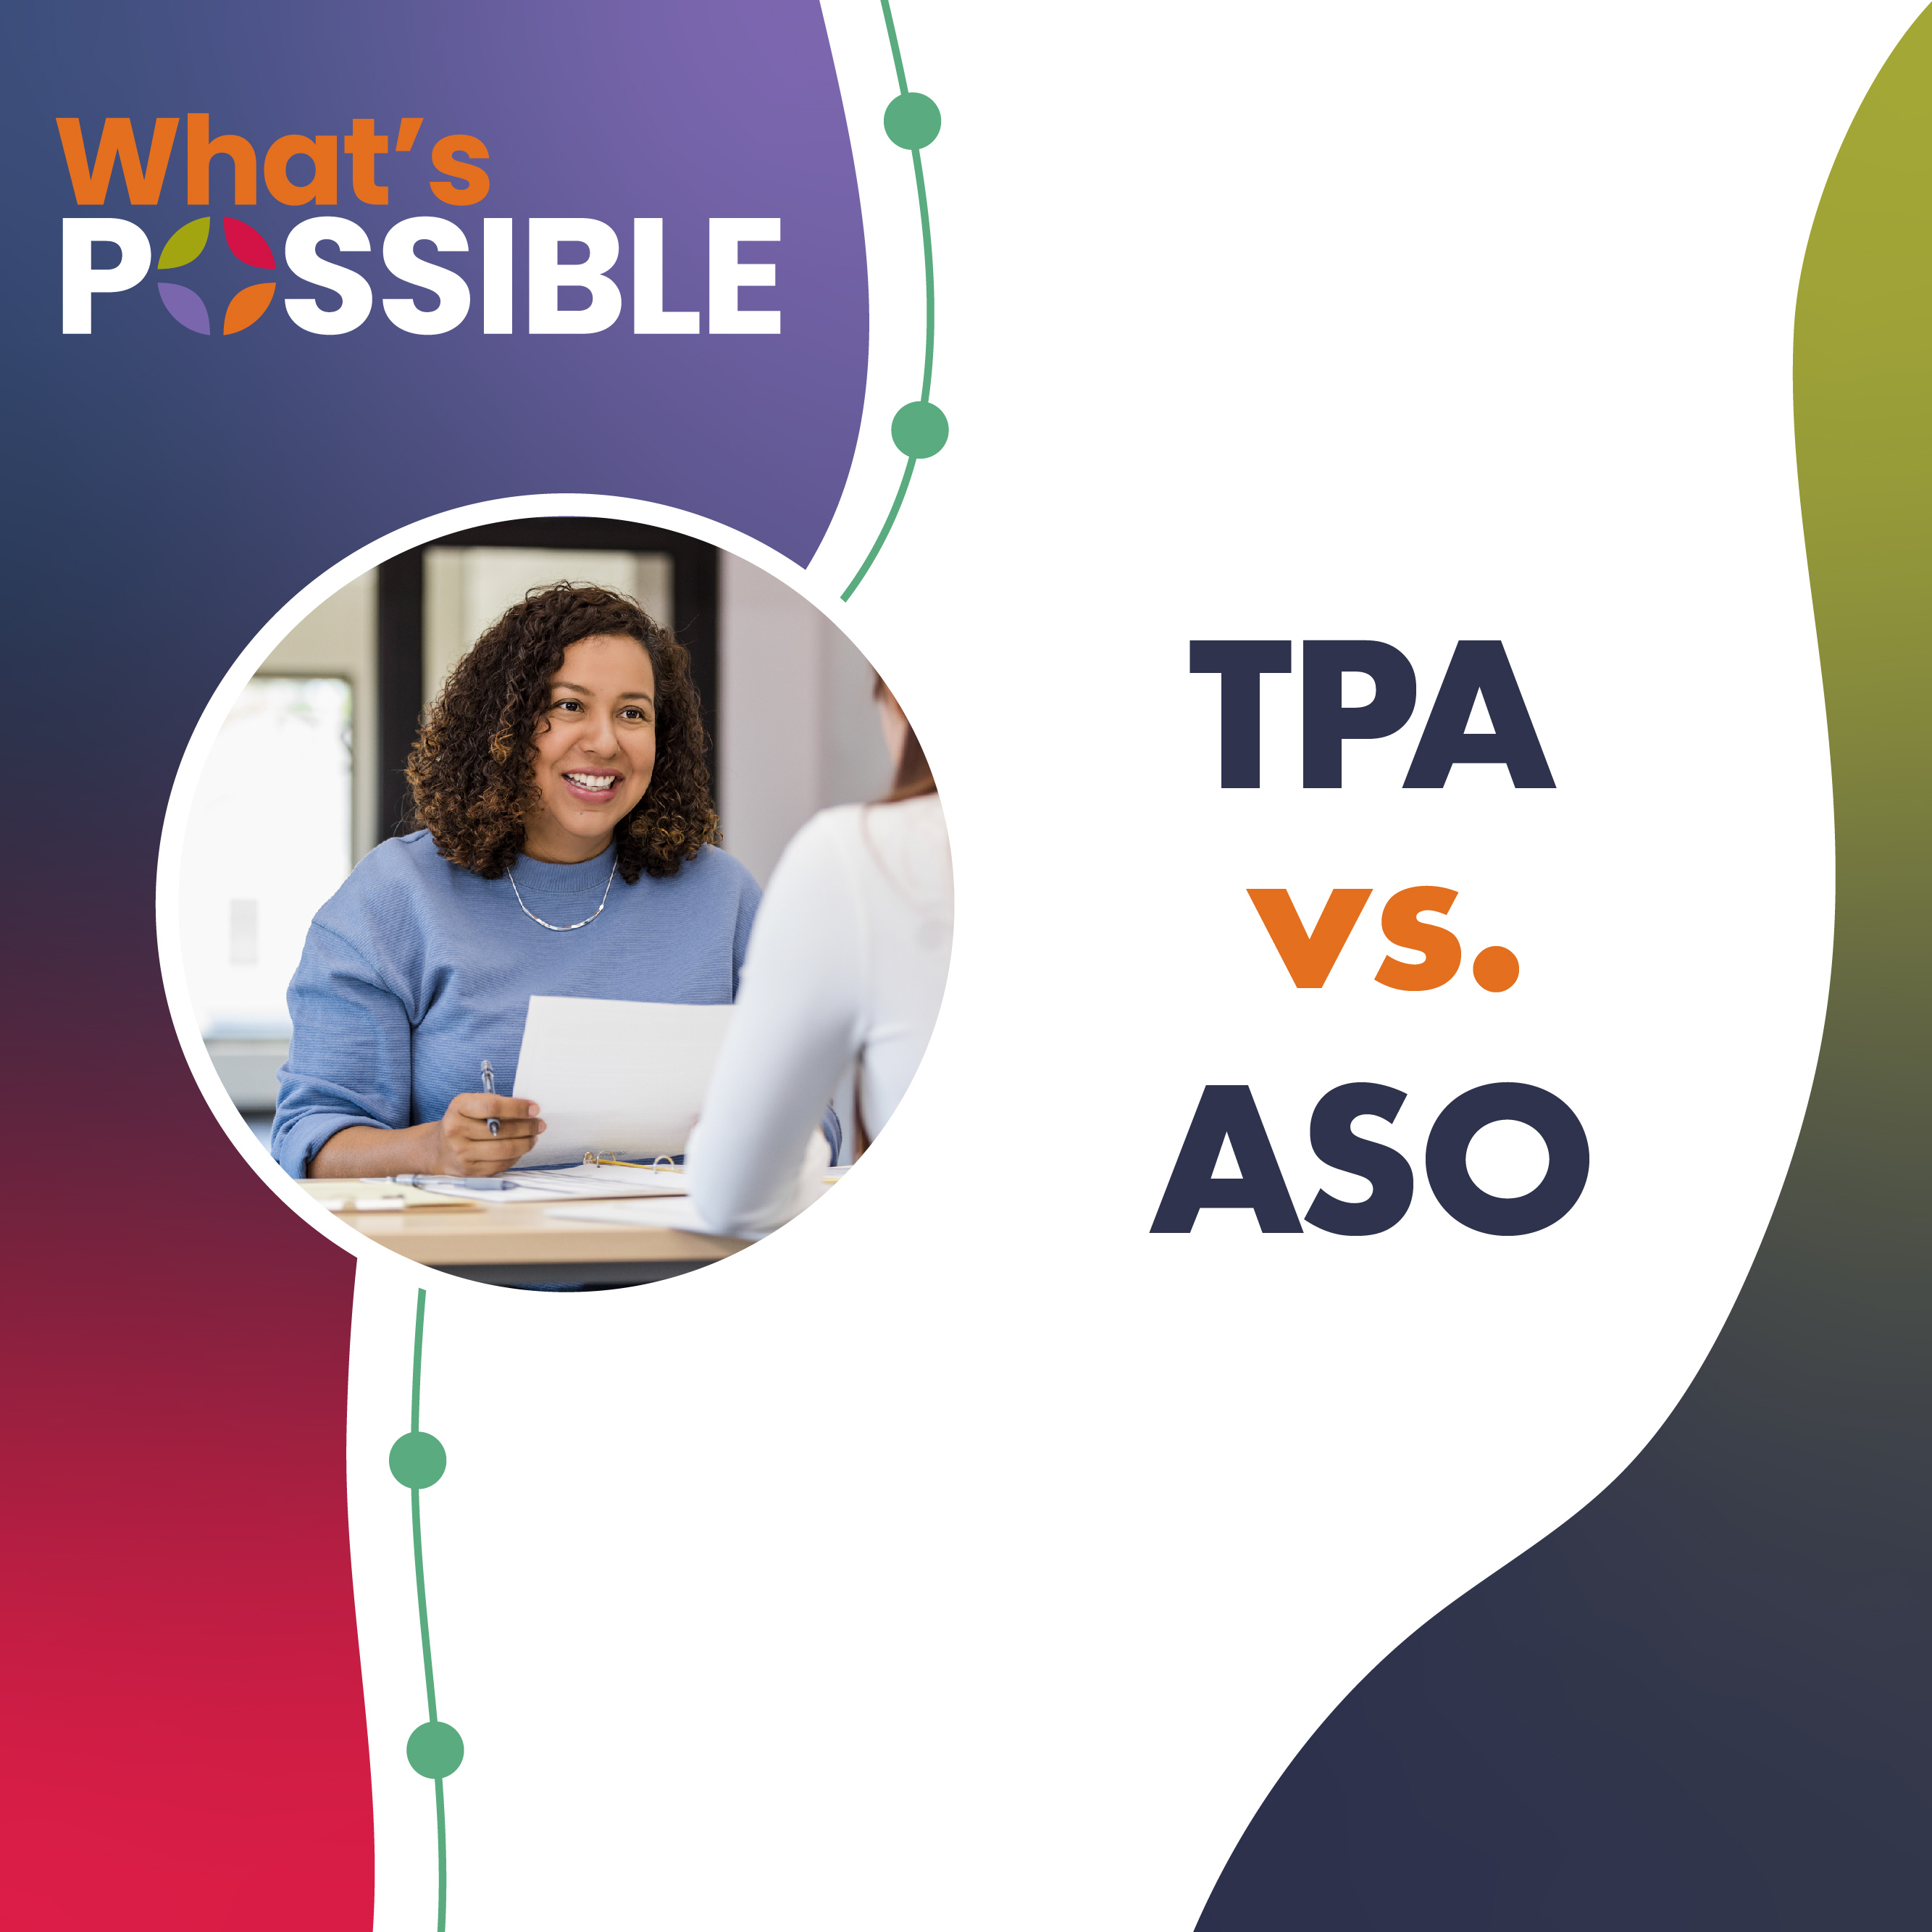 What is the Difference Between a TPA and ASO?